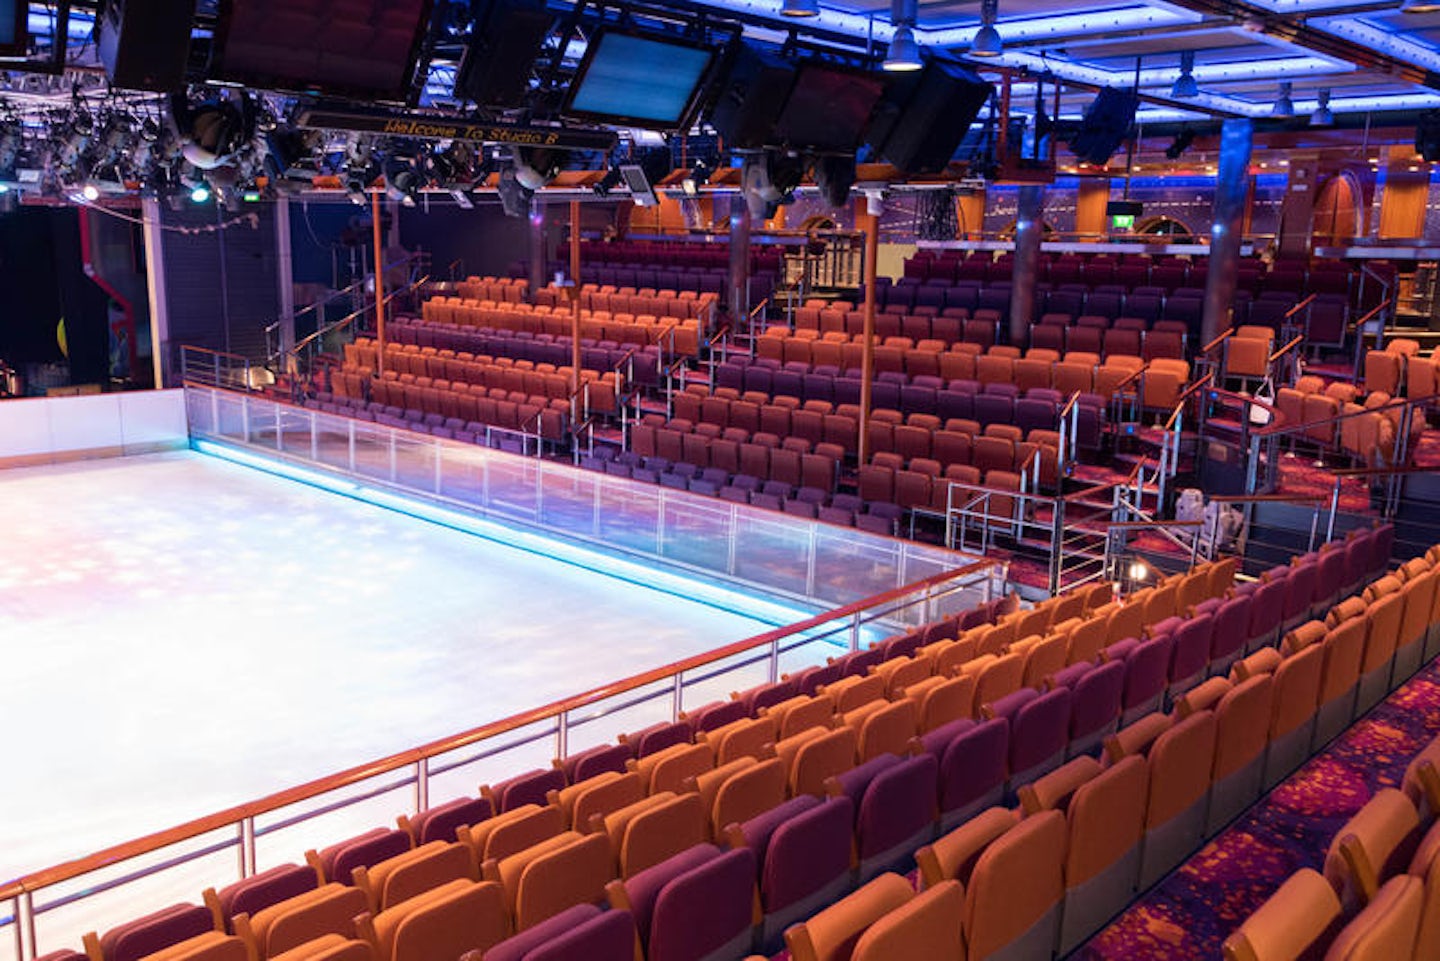 Ice Skating Rink on Freedom of the Seas